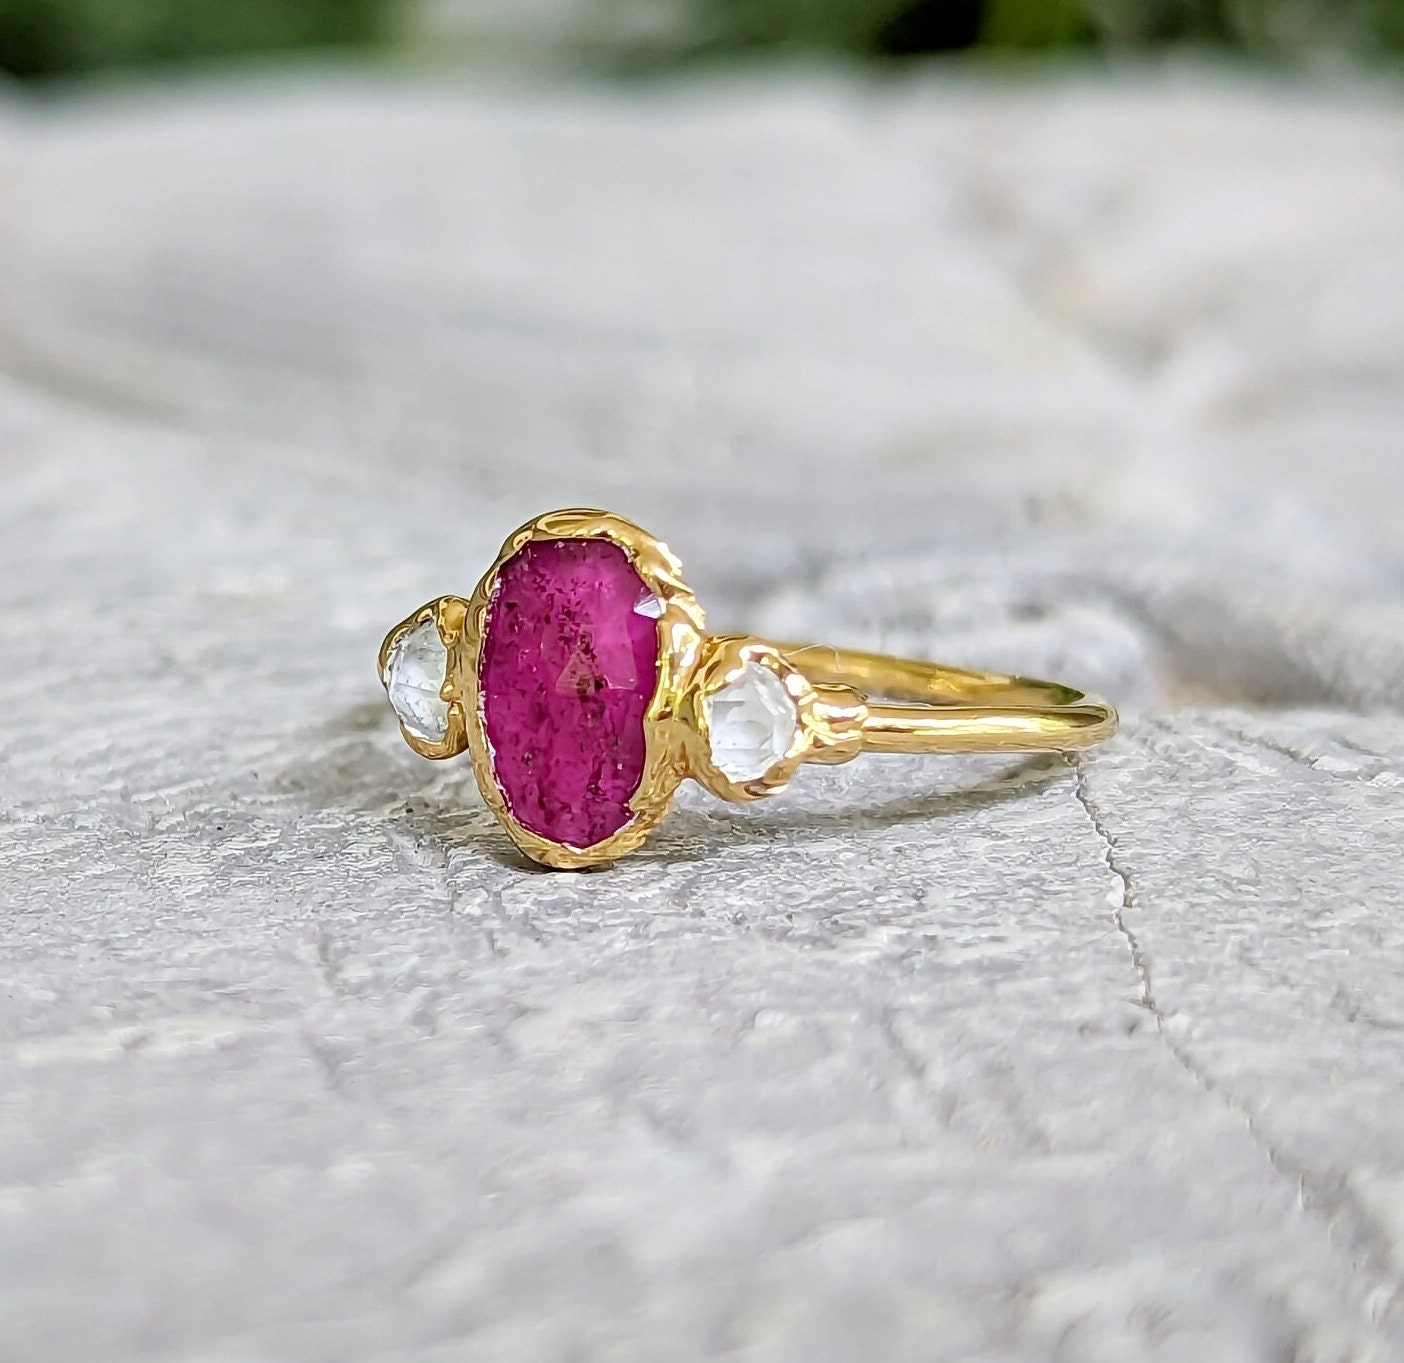 Deep Pink Rubellite Tourmaline and Herkimer diamond Engagement ring in 18k Gold